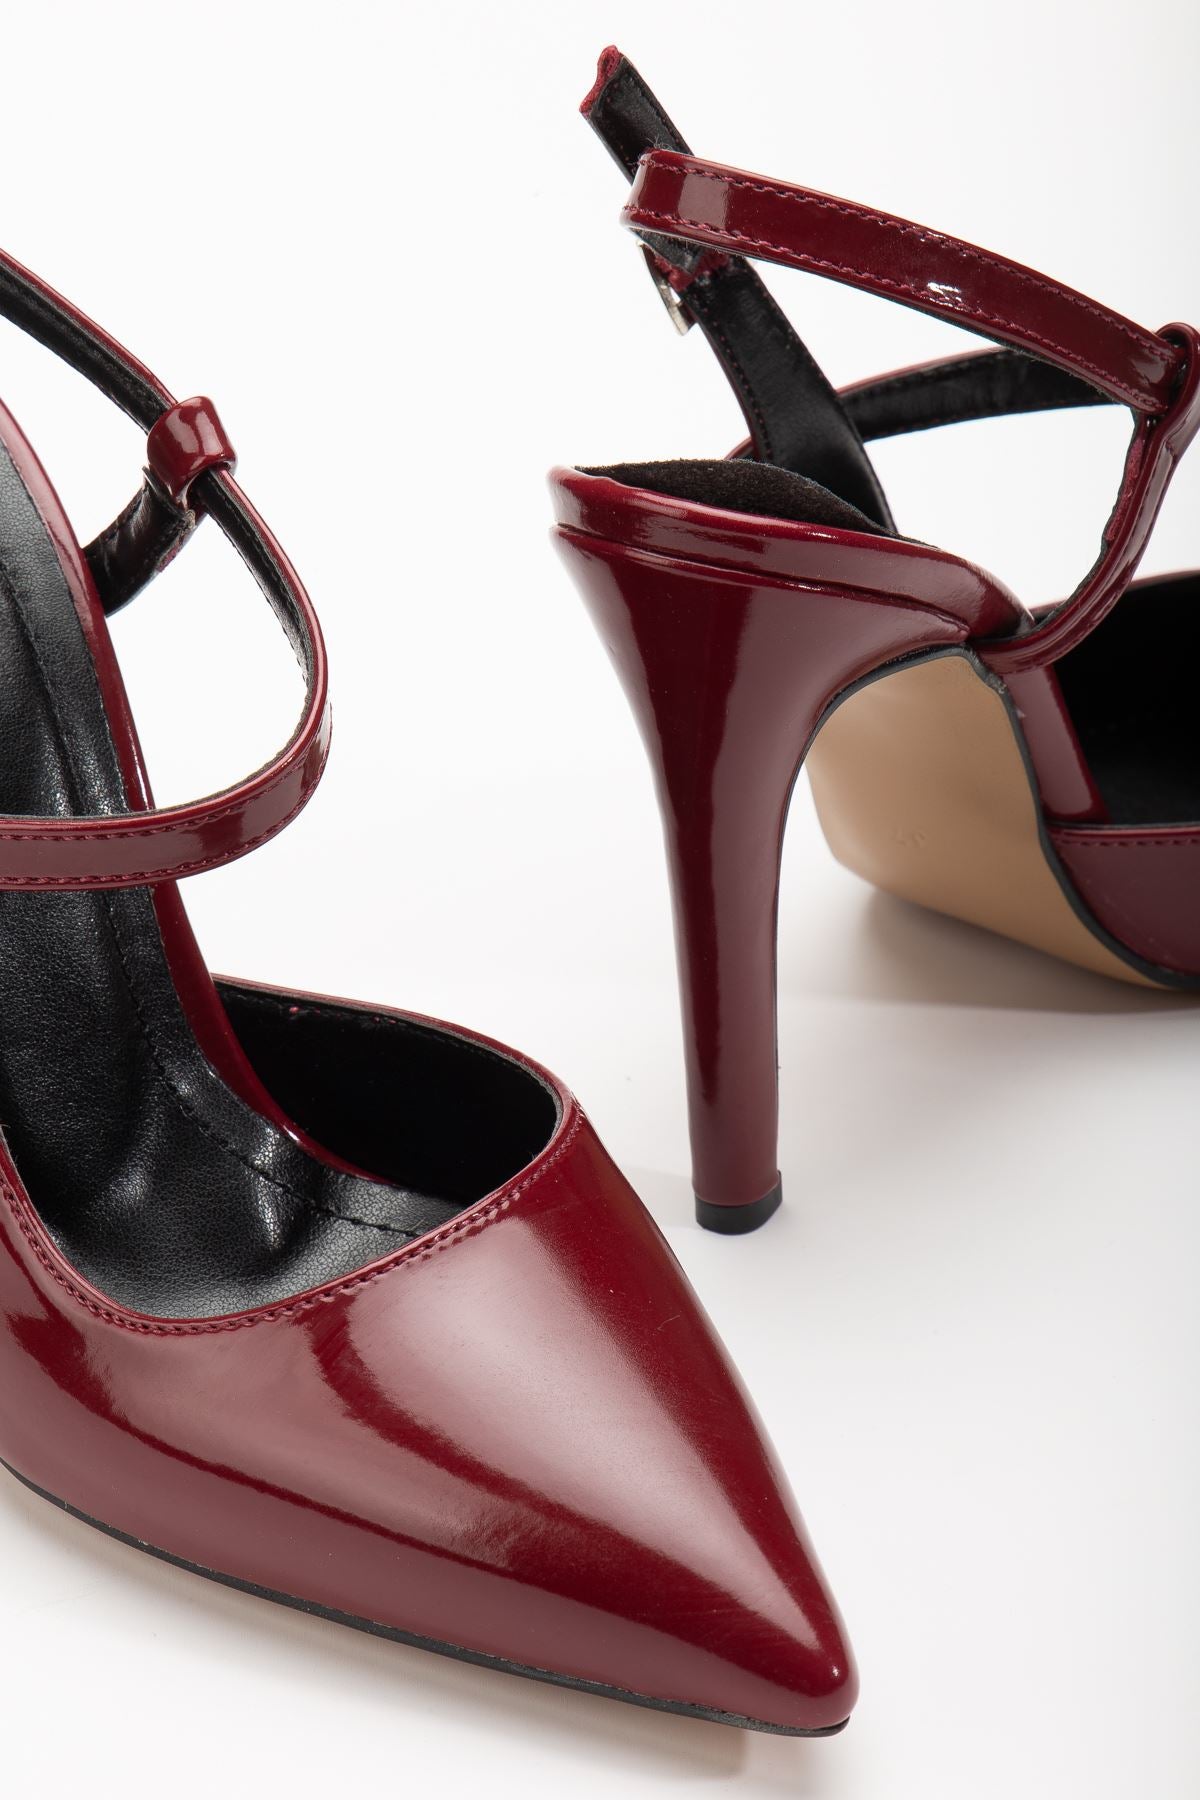 Nely Claret Red Patent Leather Pointed Women's Heeled Shoes - STREETMODE™